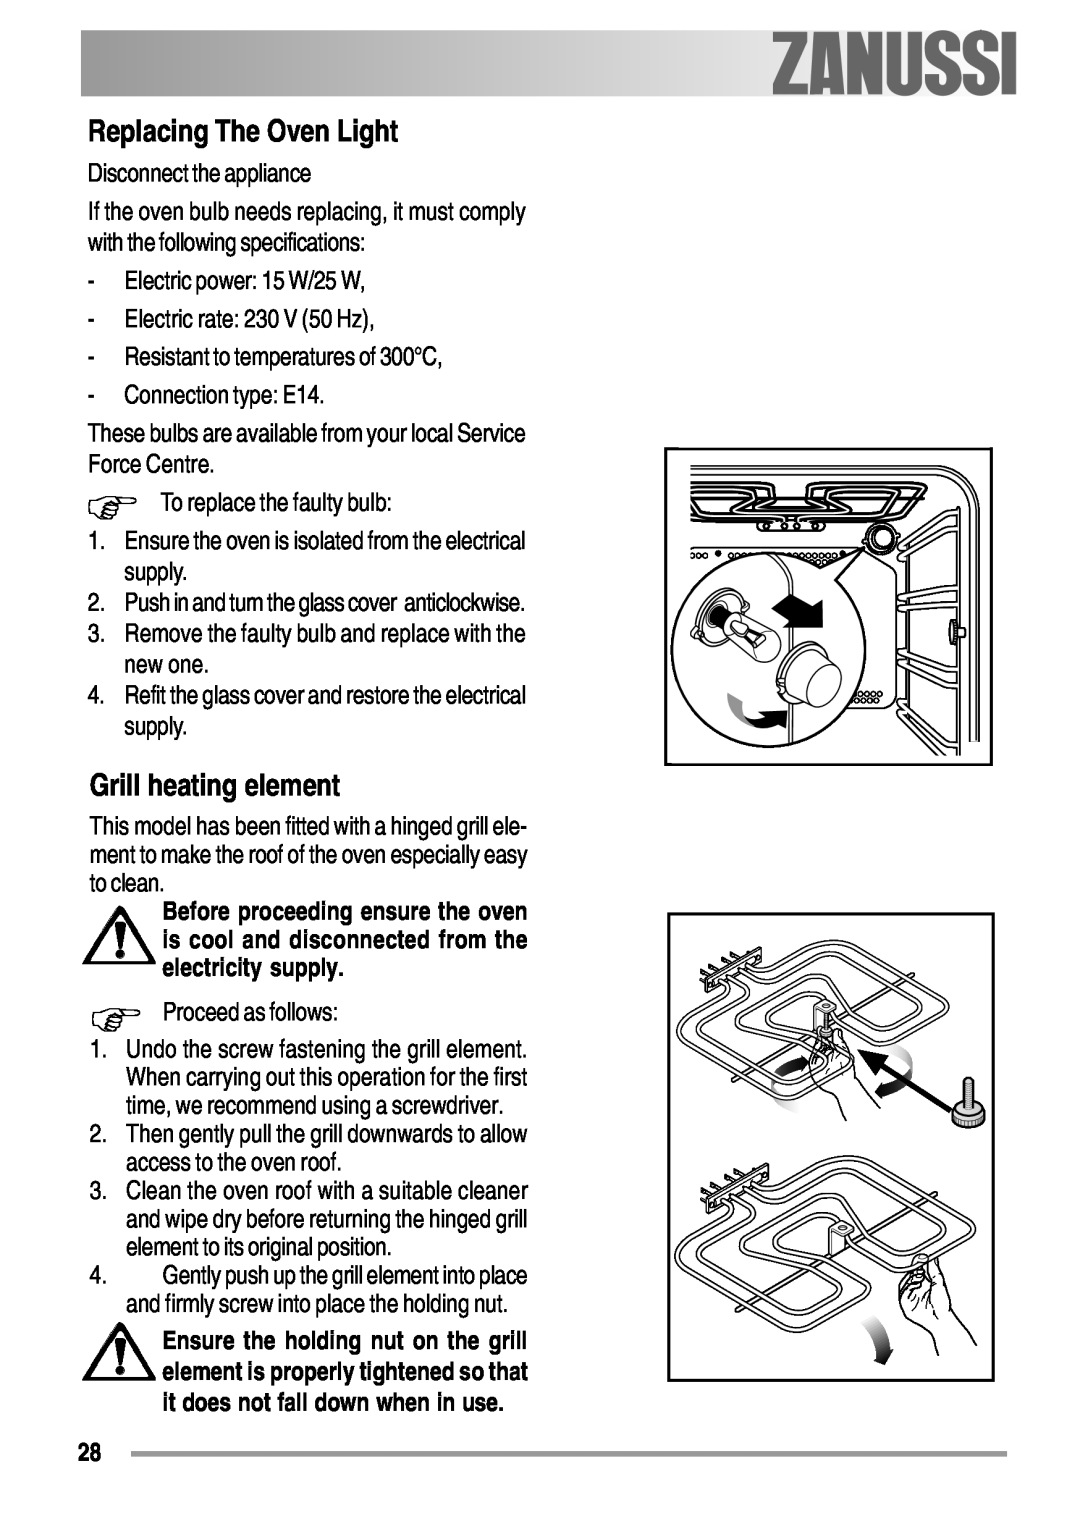 Zanussi ZOB 550 user manual Replacing The Oven Light, Grill heating element 